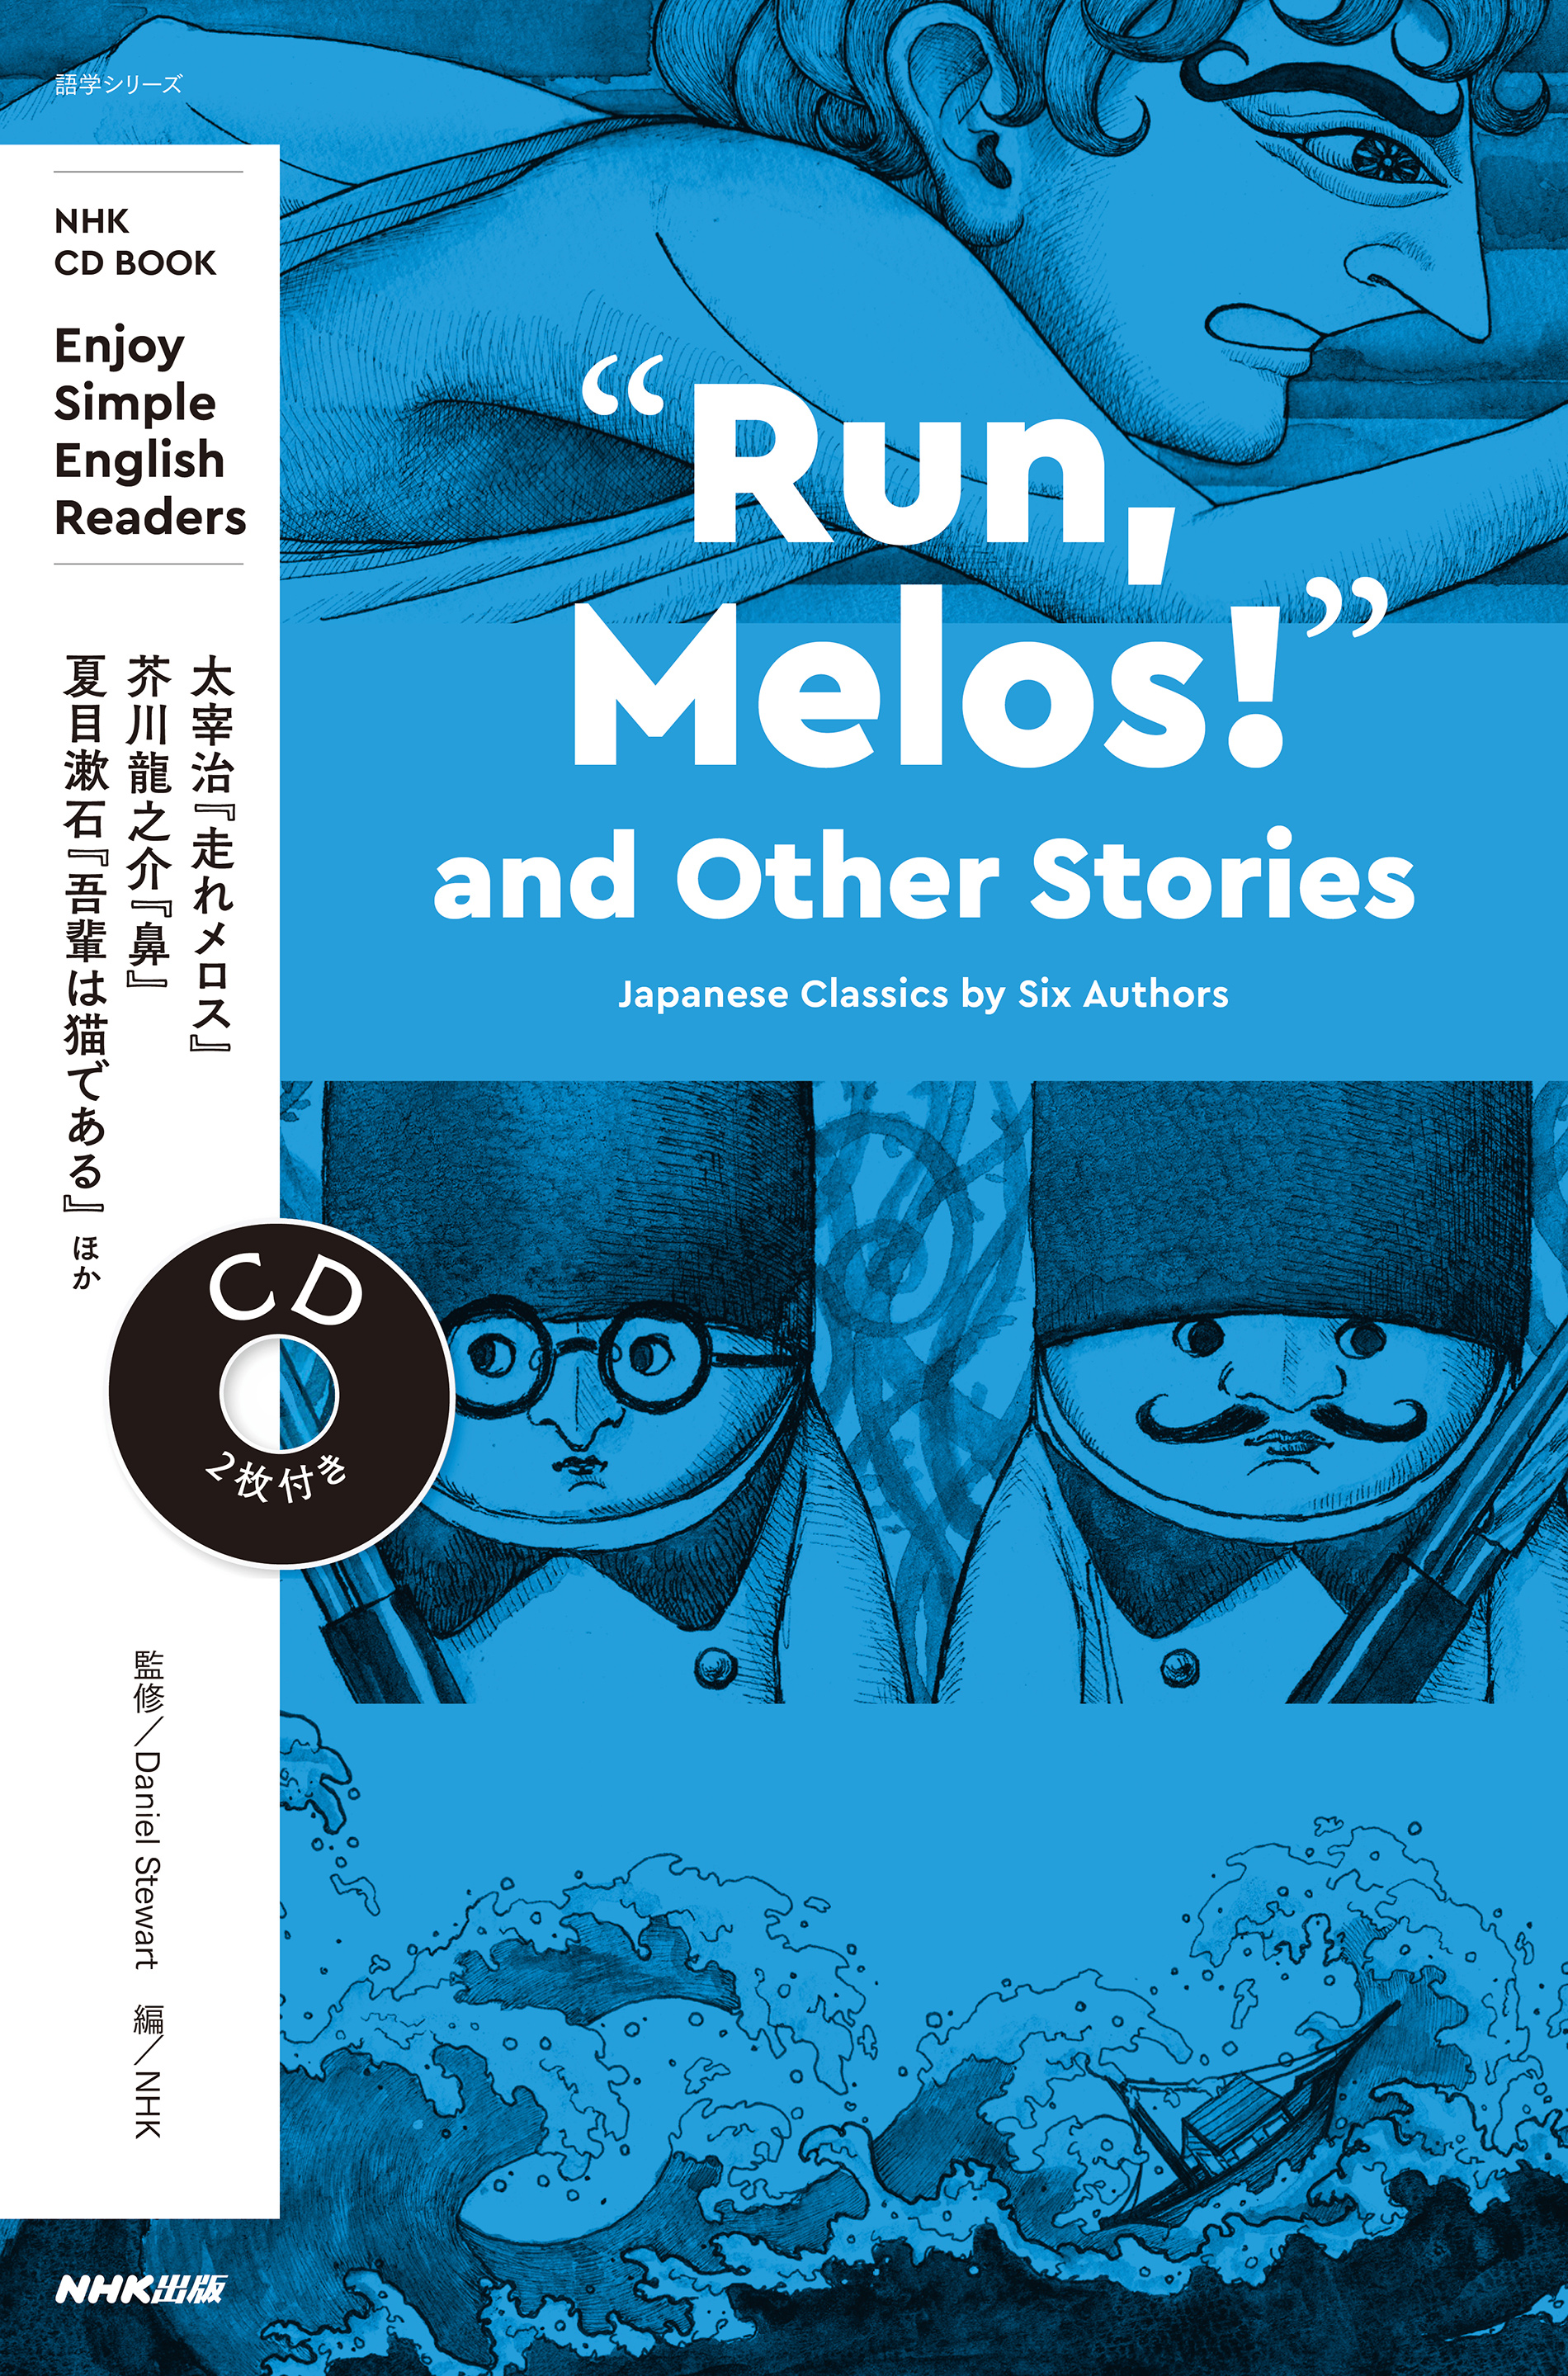 NHK CD BOOK　Enjoy Simple English Readers　Run,　Melos！　and Other Storiesの商品画像